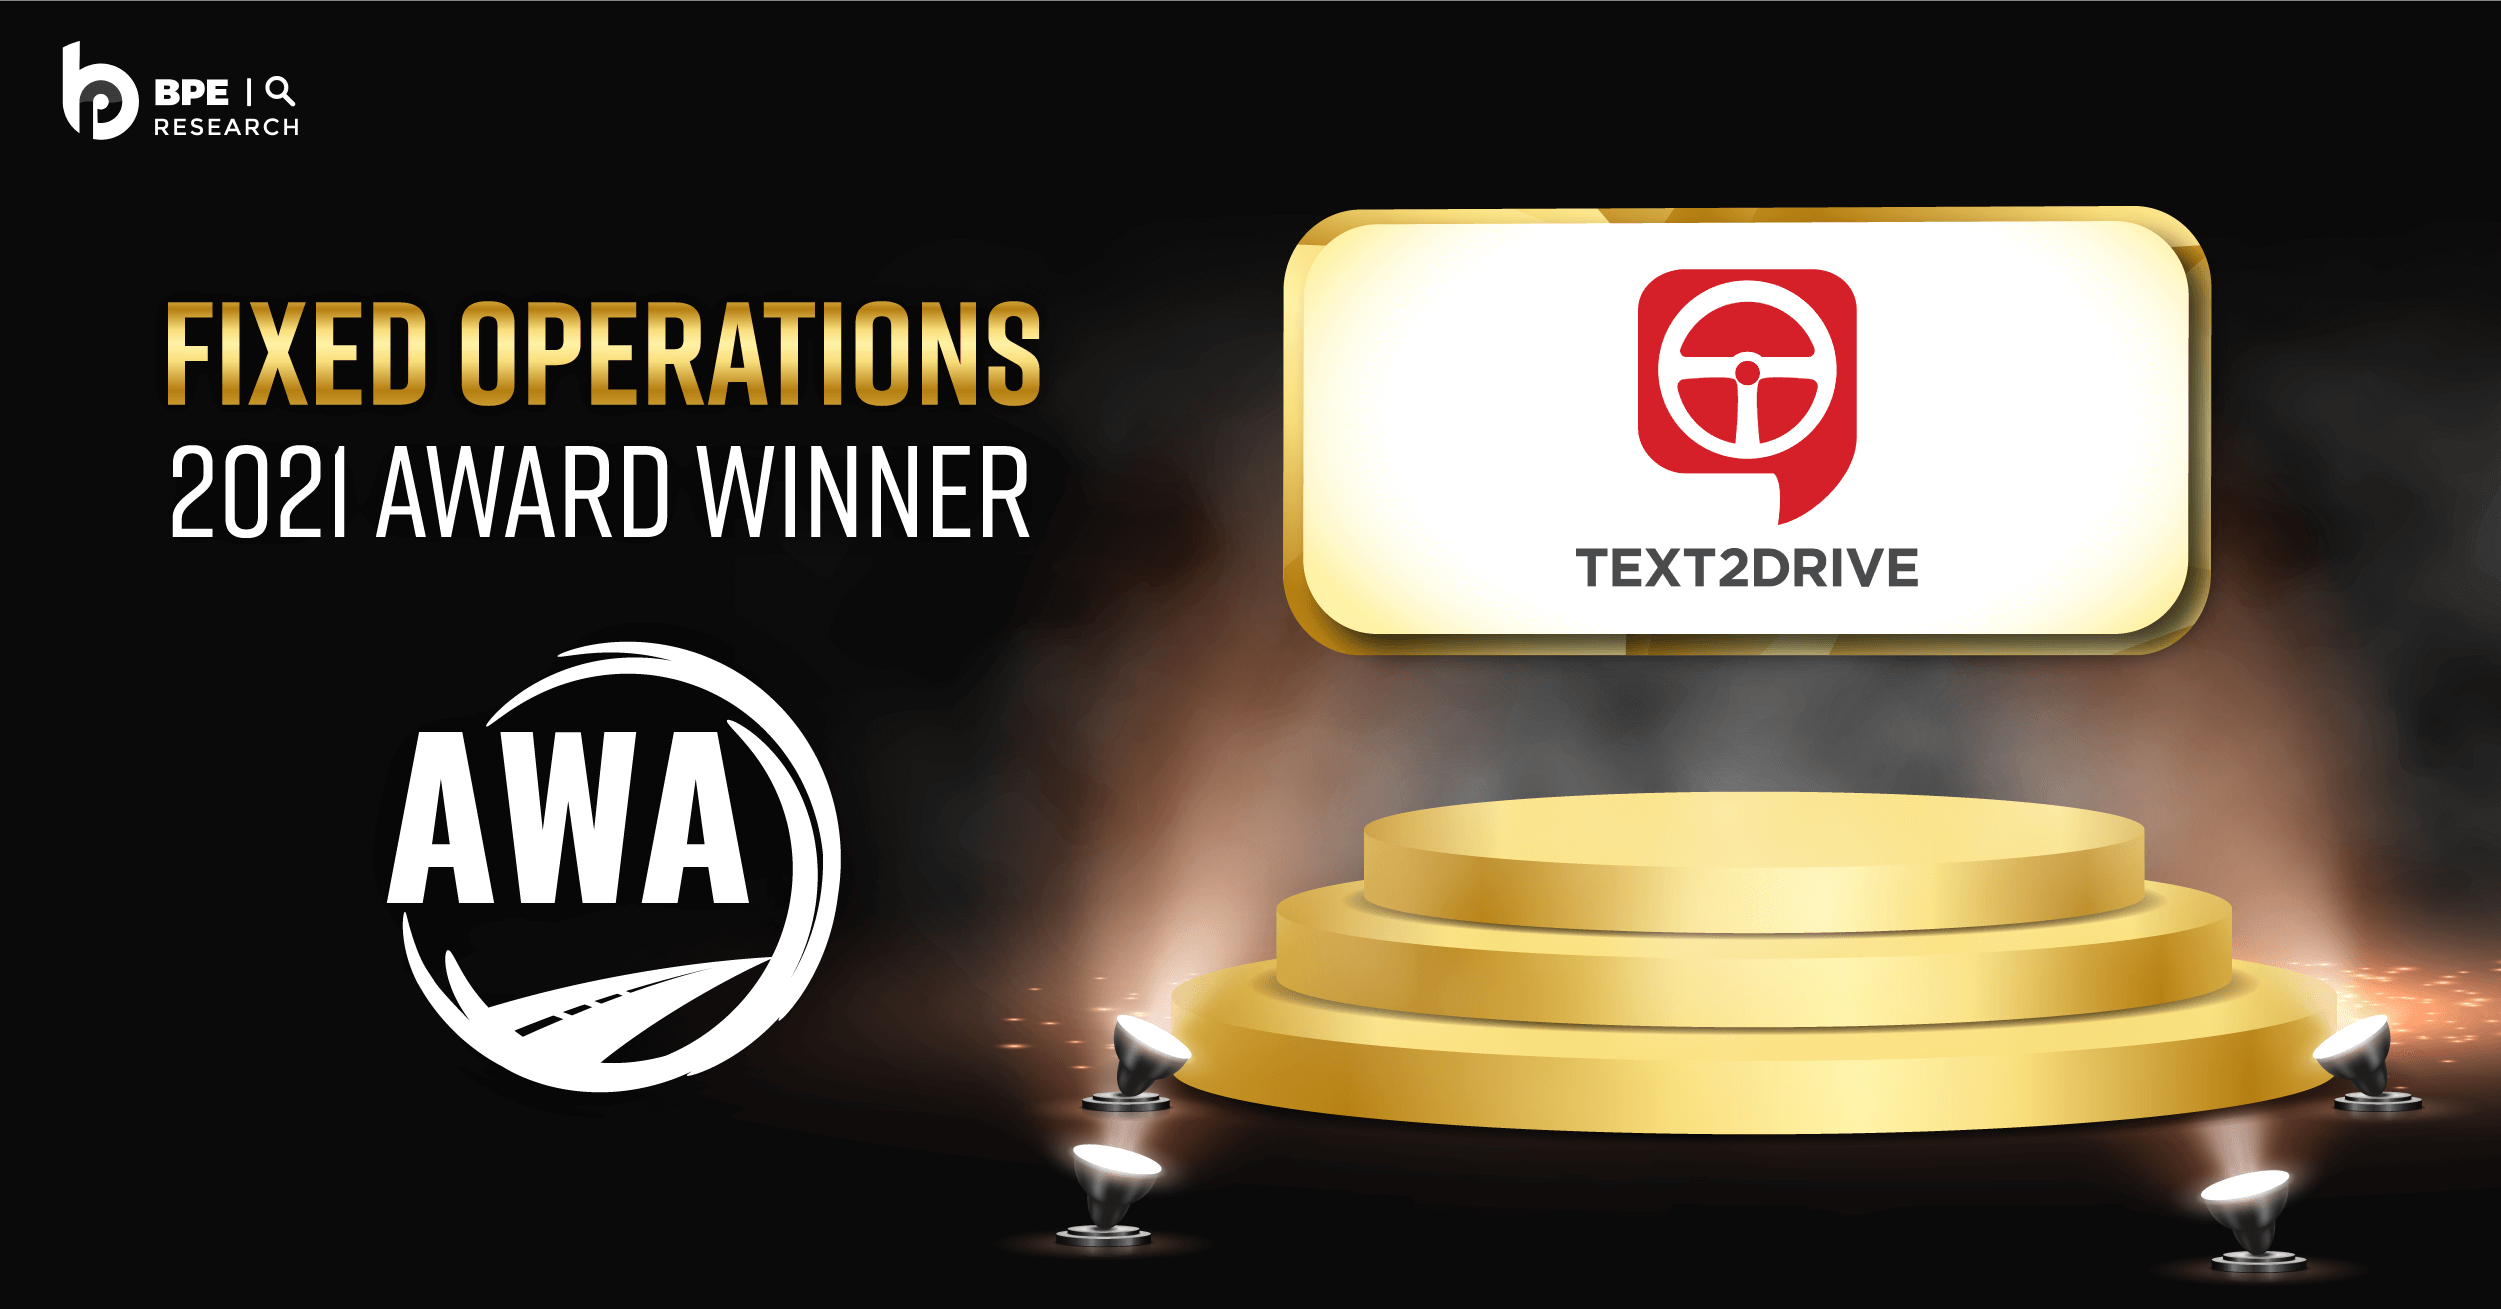 TEXT2DRIVE Wins 2021 AWA Award for Fixed Operations